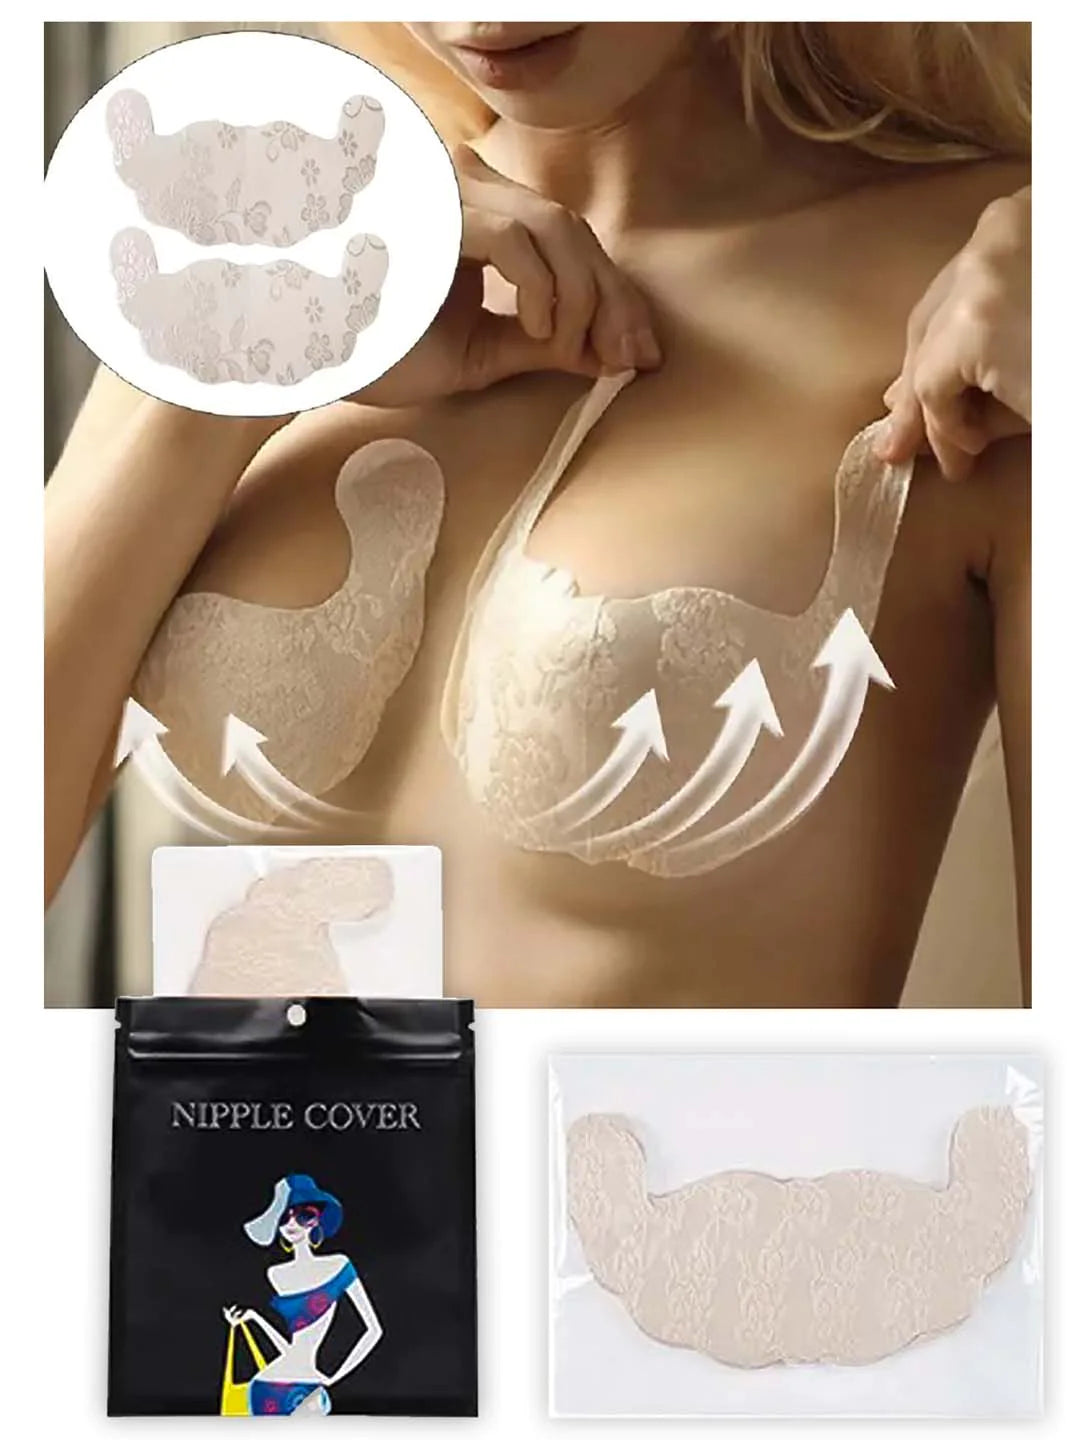 Bellofox Push Up Breast Lift Tape Women Silicone Breast Lift Covers Nipple  Stickers Pasties Invisible Adhesive Nipple Covers Reusable Comfortable :  : Clothing & Accessories